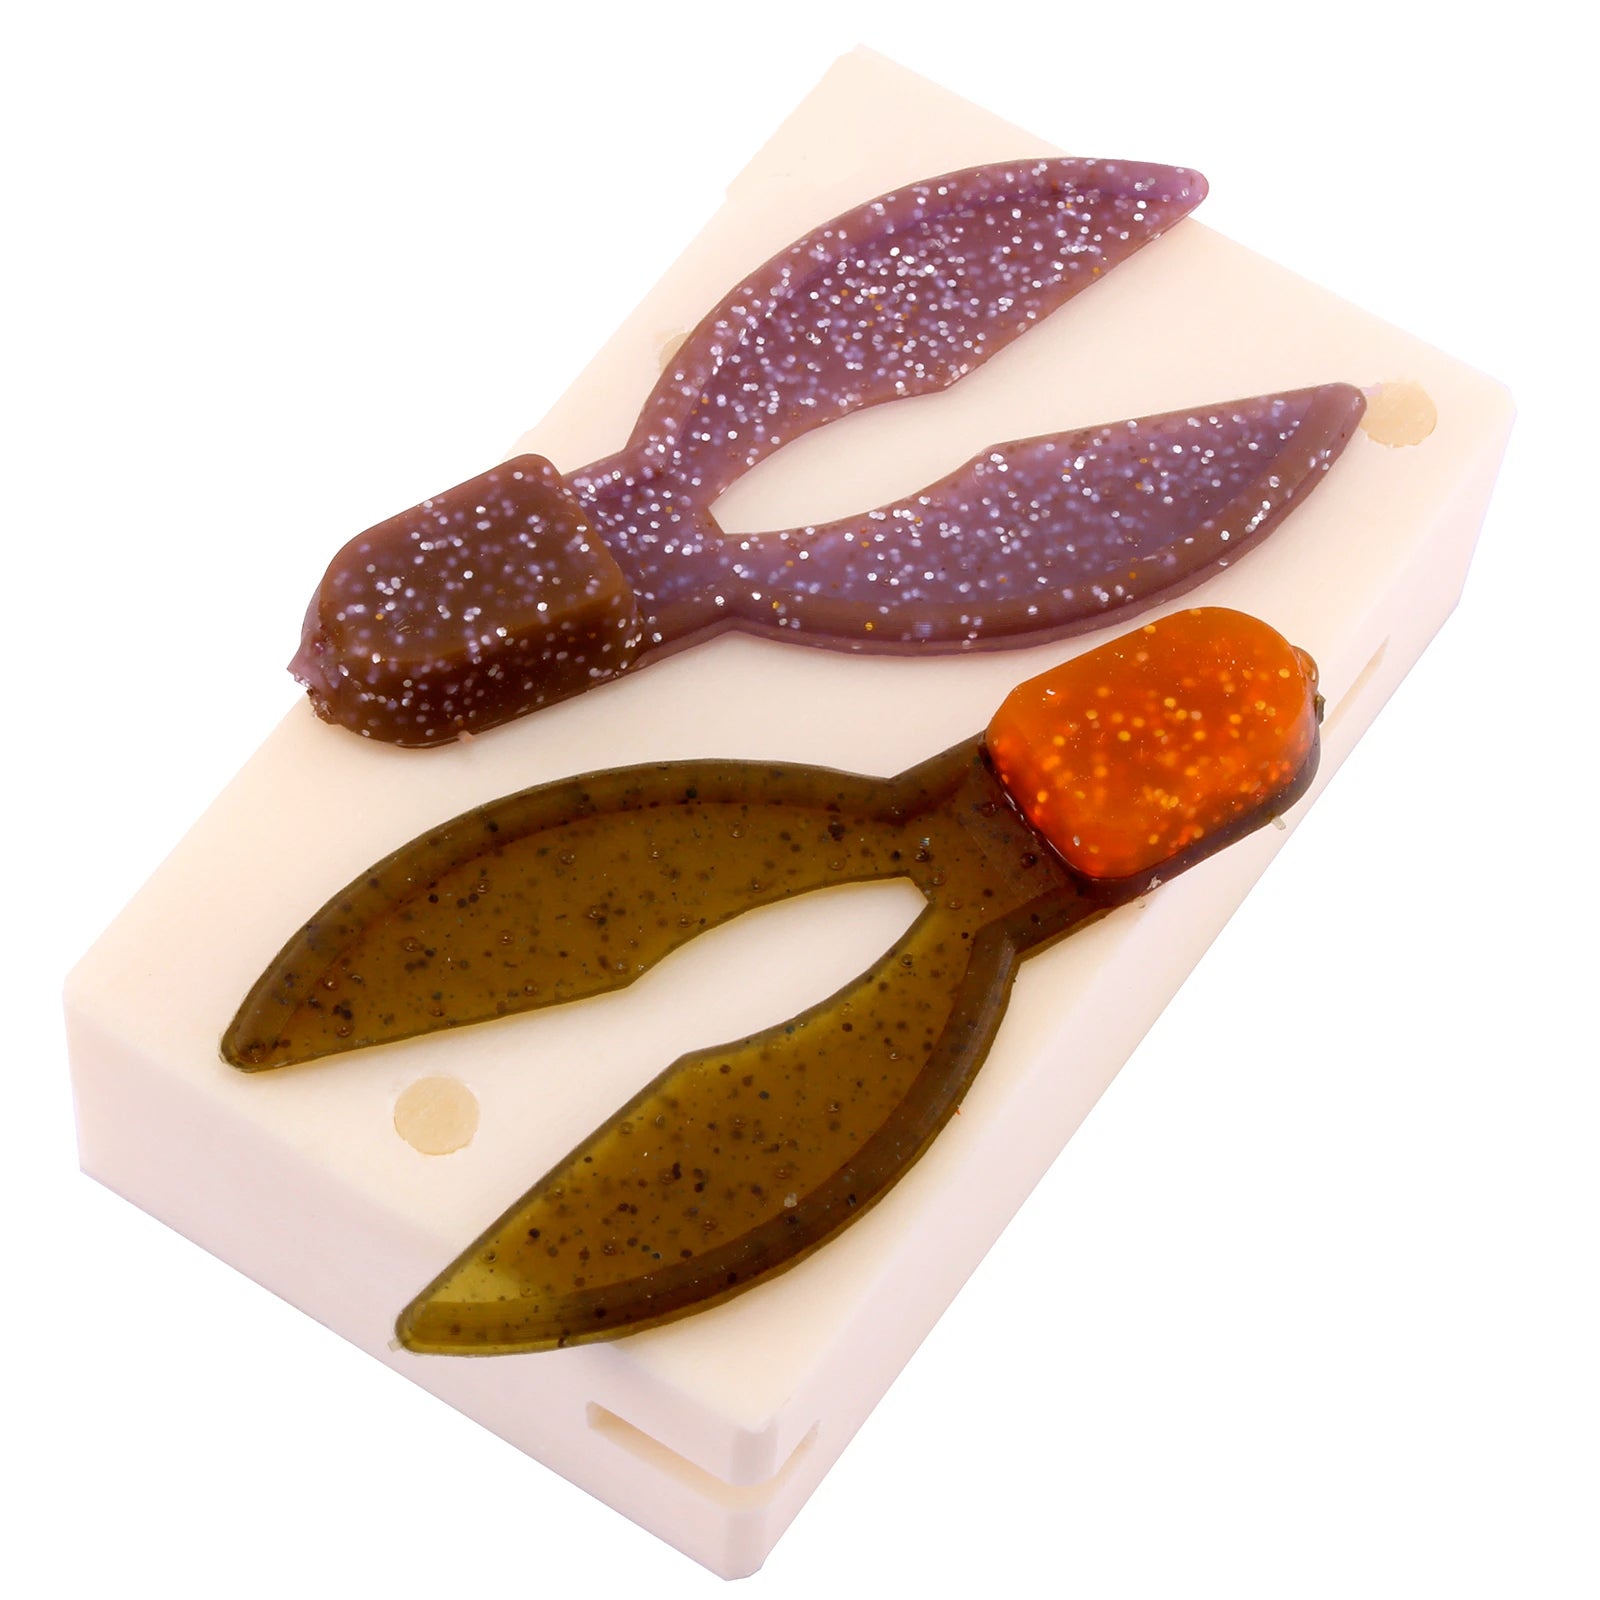 Soft Plastics Mold for 2.8 Inch craw lure - 1 Cavity Mold. Bugmolds USA  offers a high quality stone mold for soft plastics fishing baits. This mold  is a single cavity piece